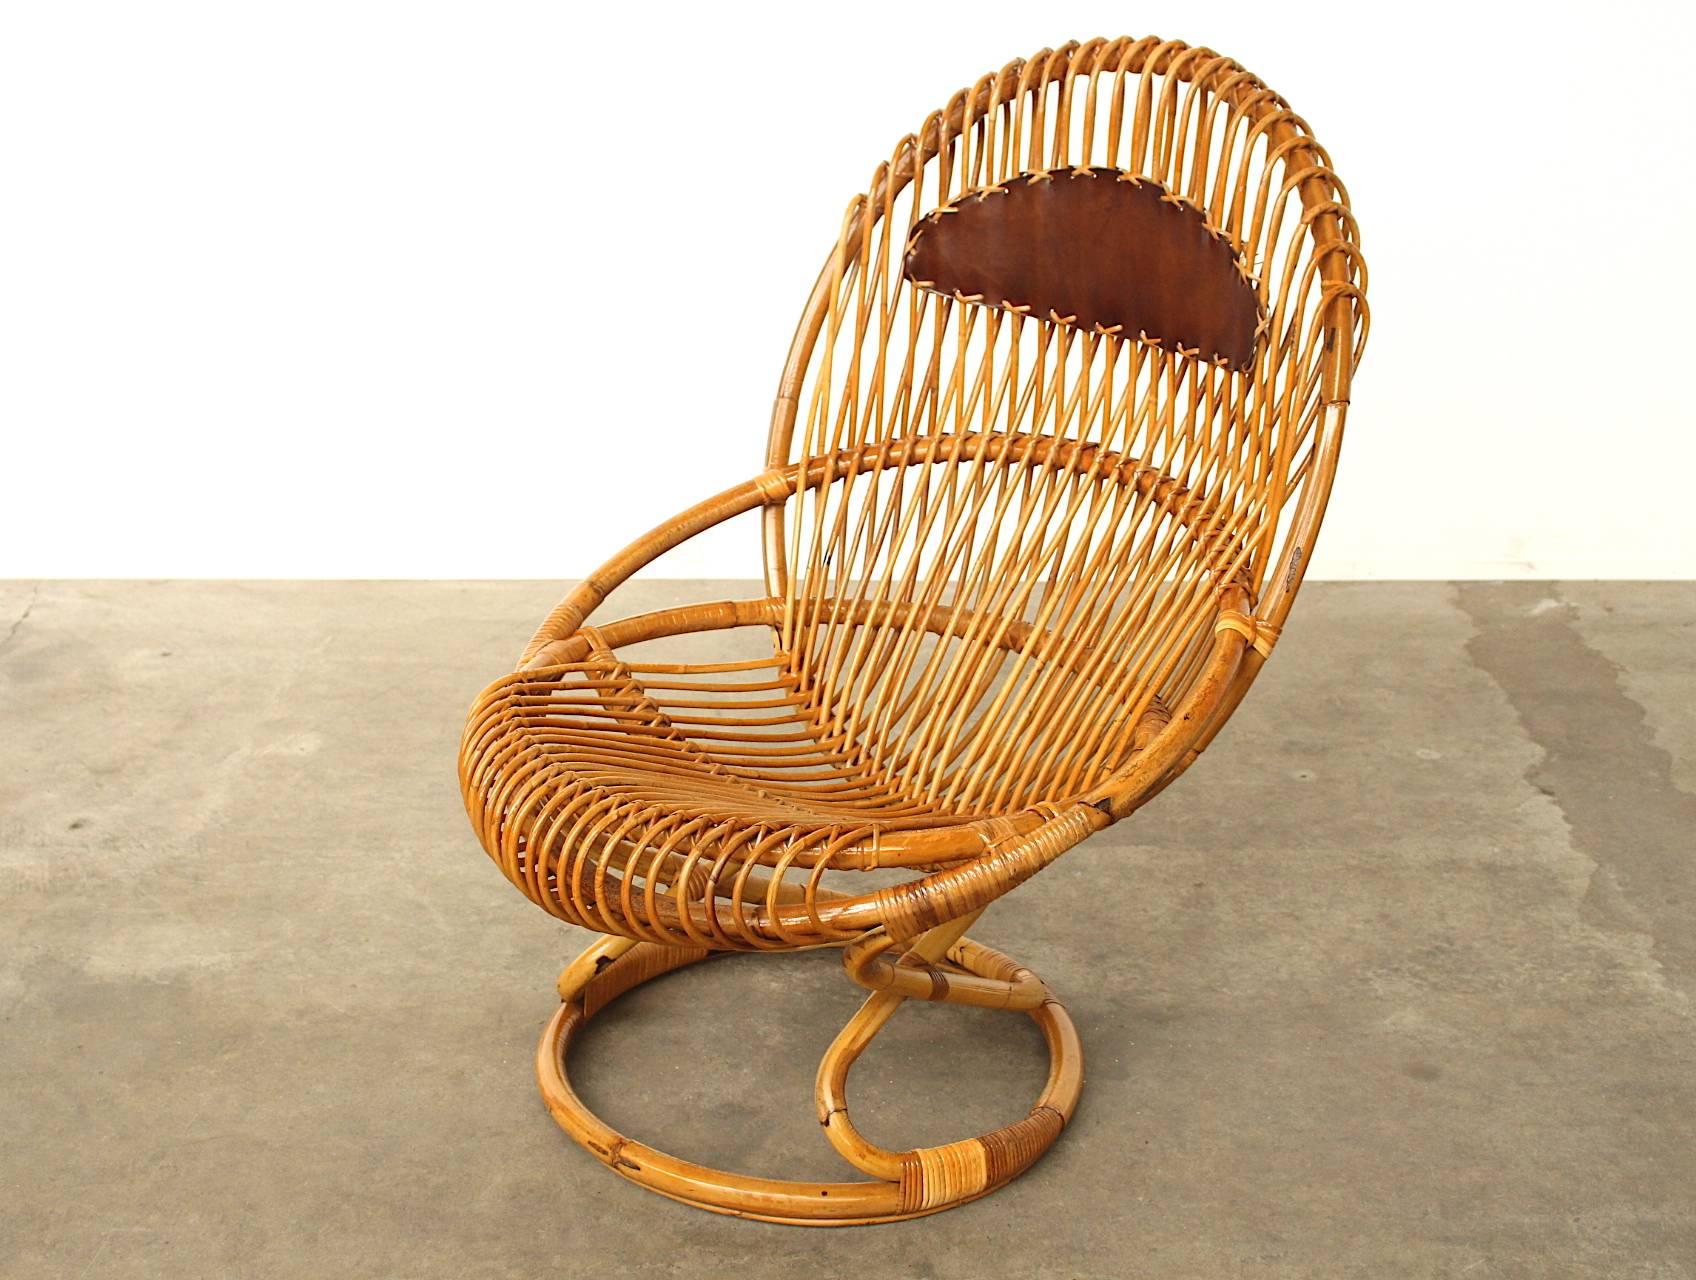 Very rare to find easy chair or armchair designed by Italian designer Giovanni Travasa for the design company Pierantonio Bonacina in the 1950s. The chair is beautifully master handcrafted with bent rattan strings and looks absolutely amazing from